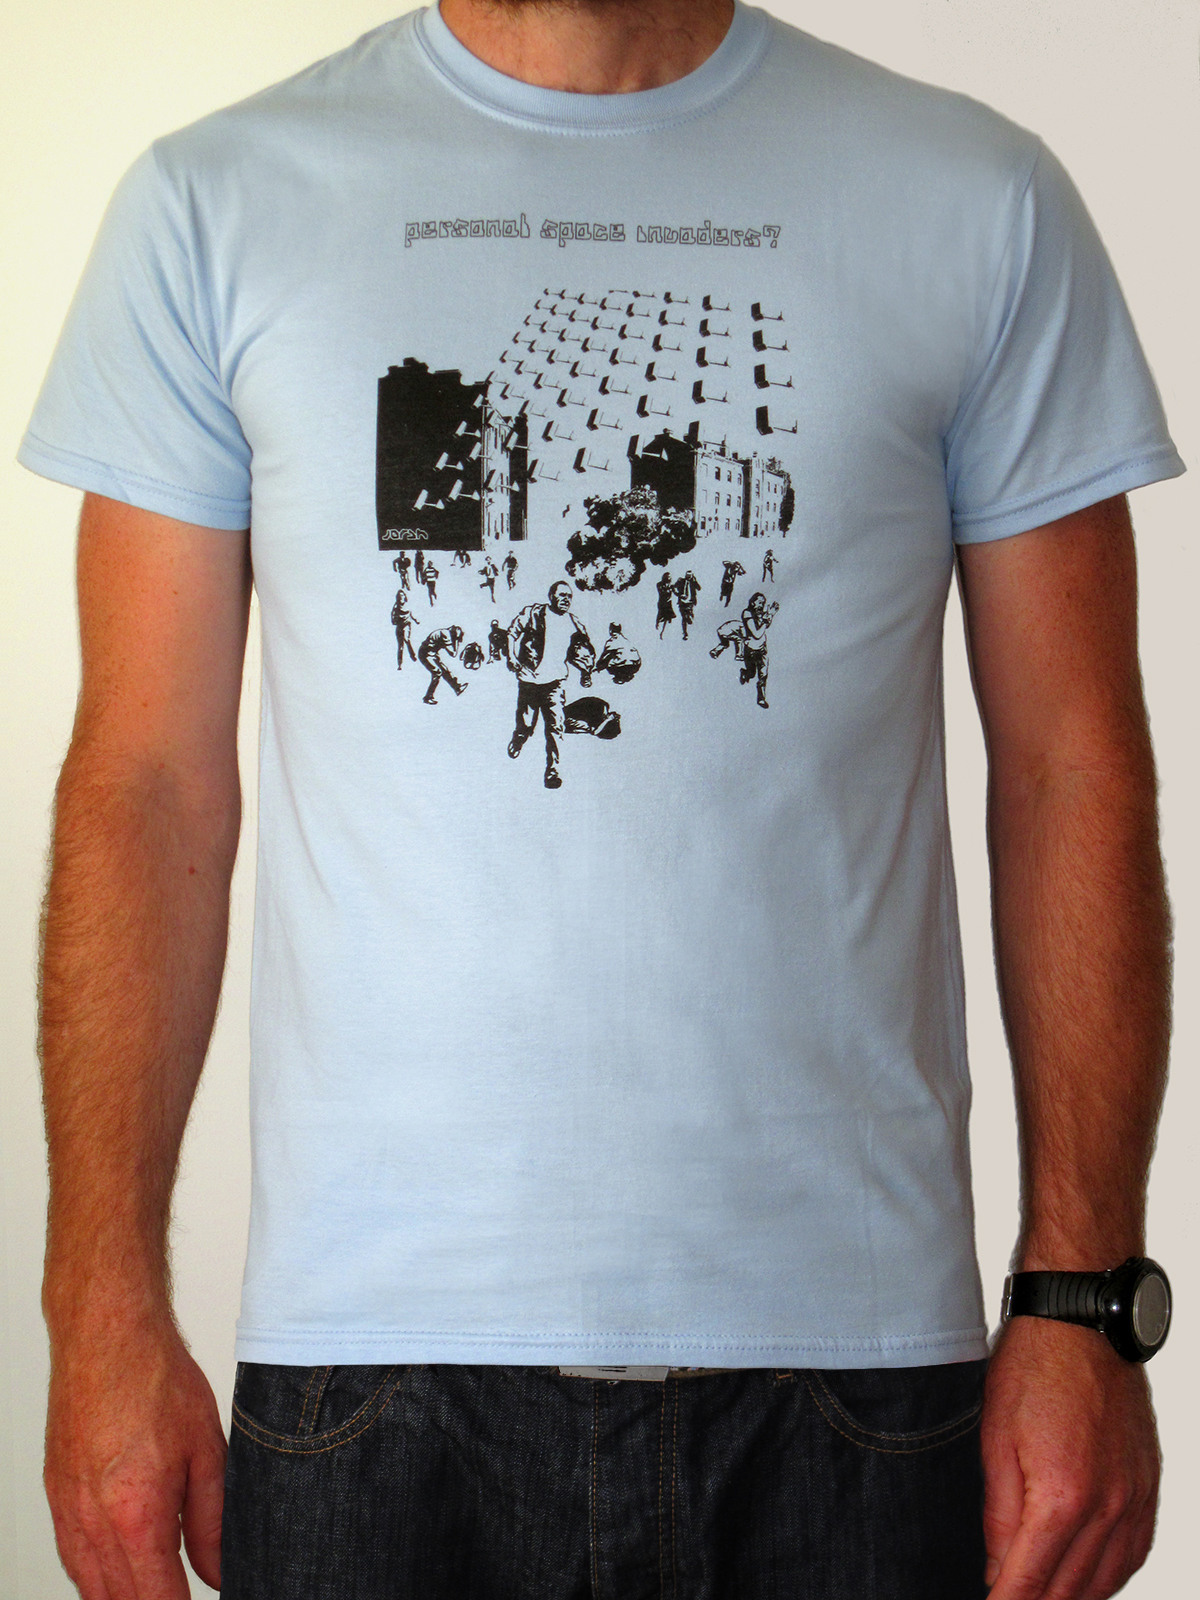 t-shirt with CCTV cameras coming out the sky in space invaders formation. Explosion, people running scared